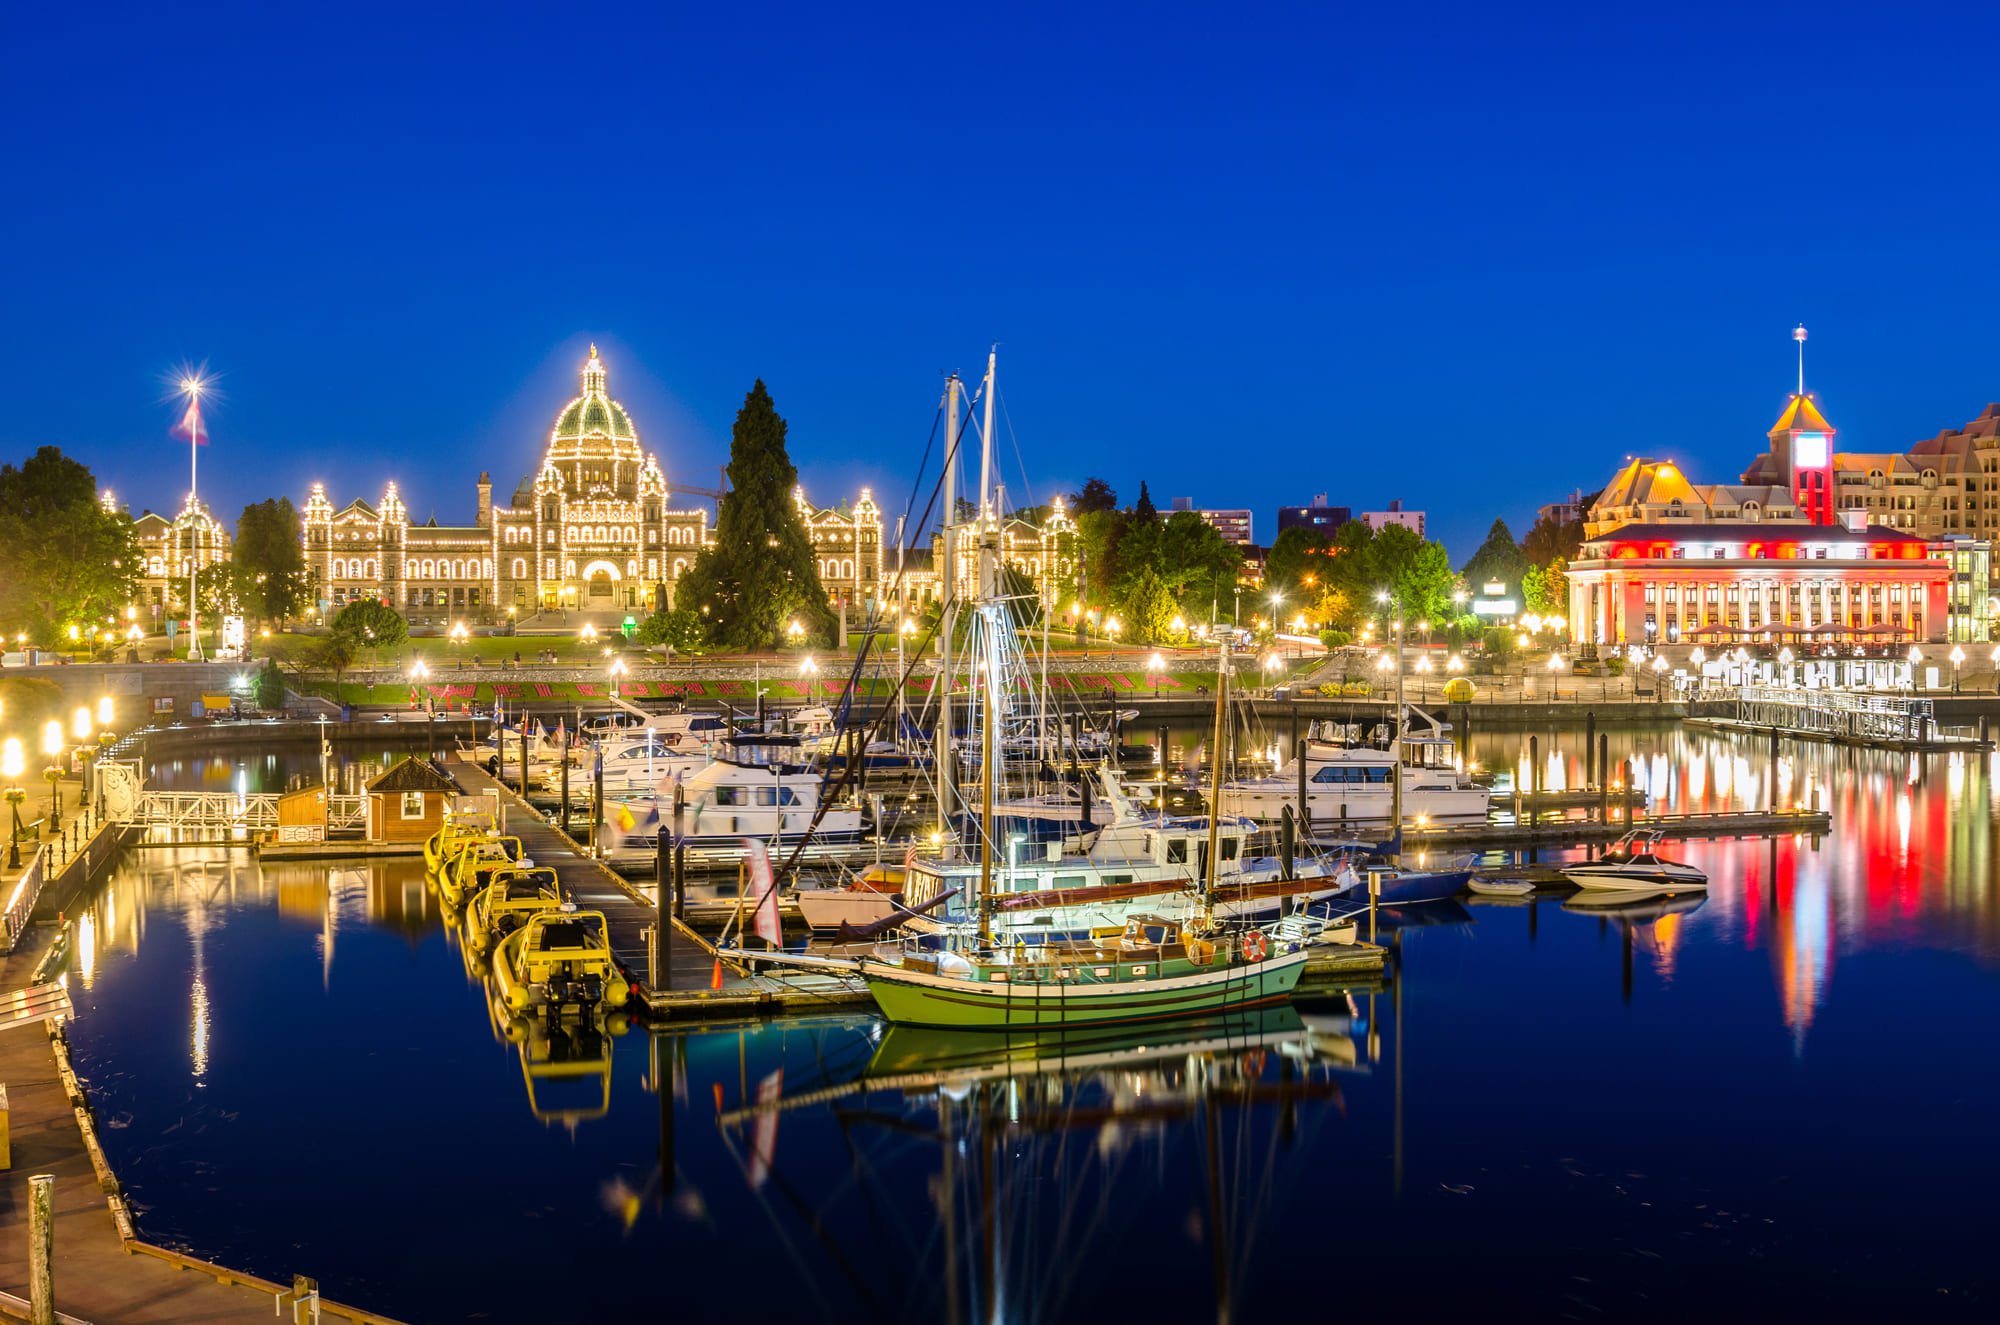 Things to do in Victoria